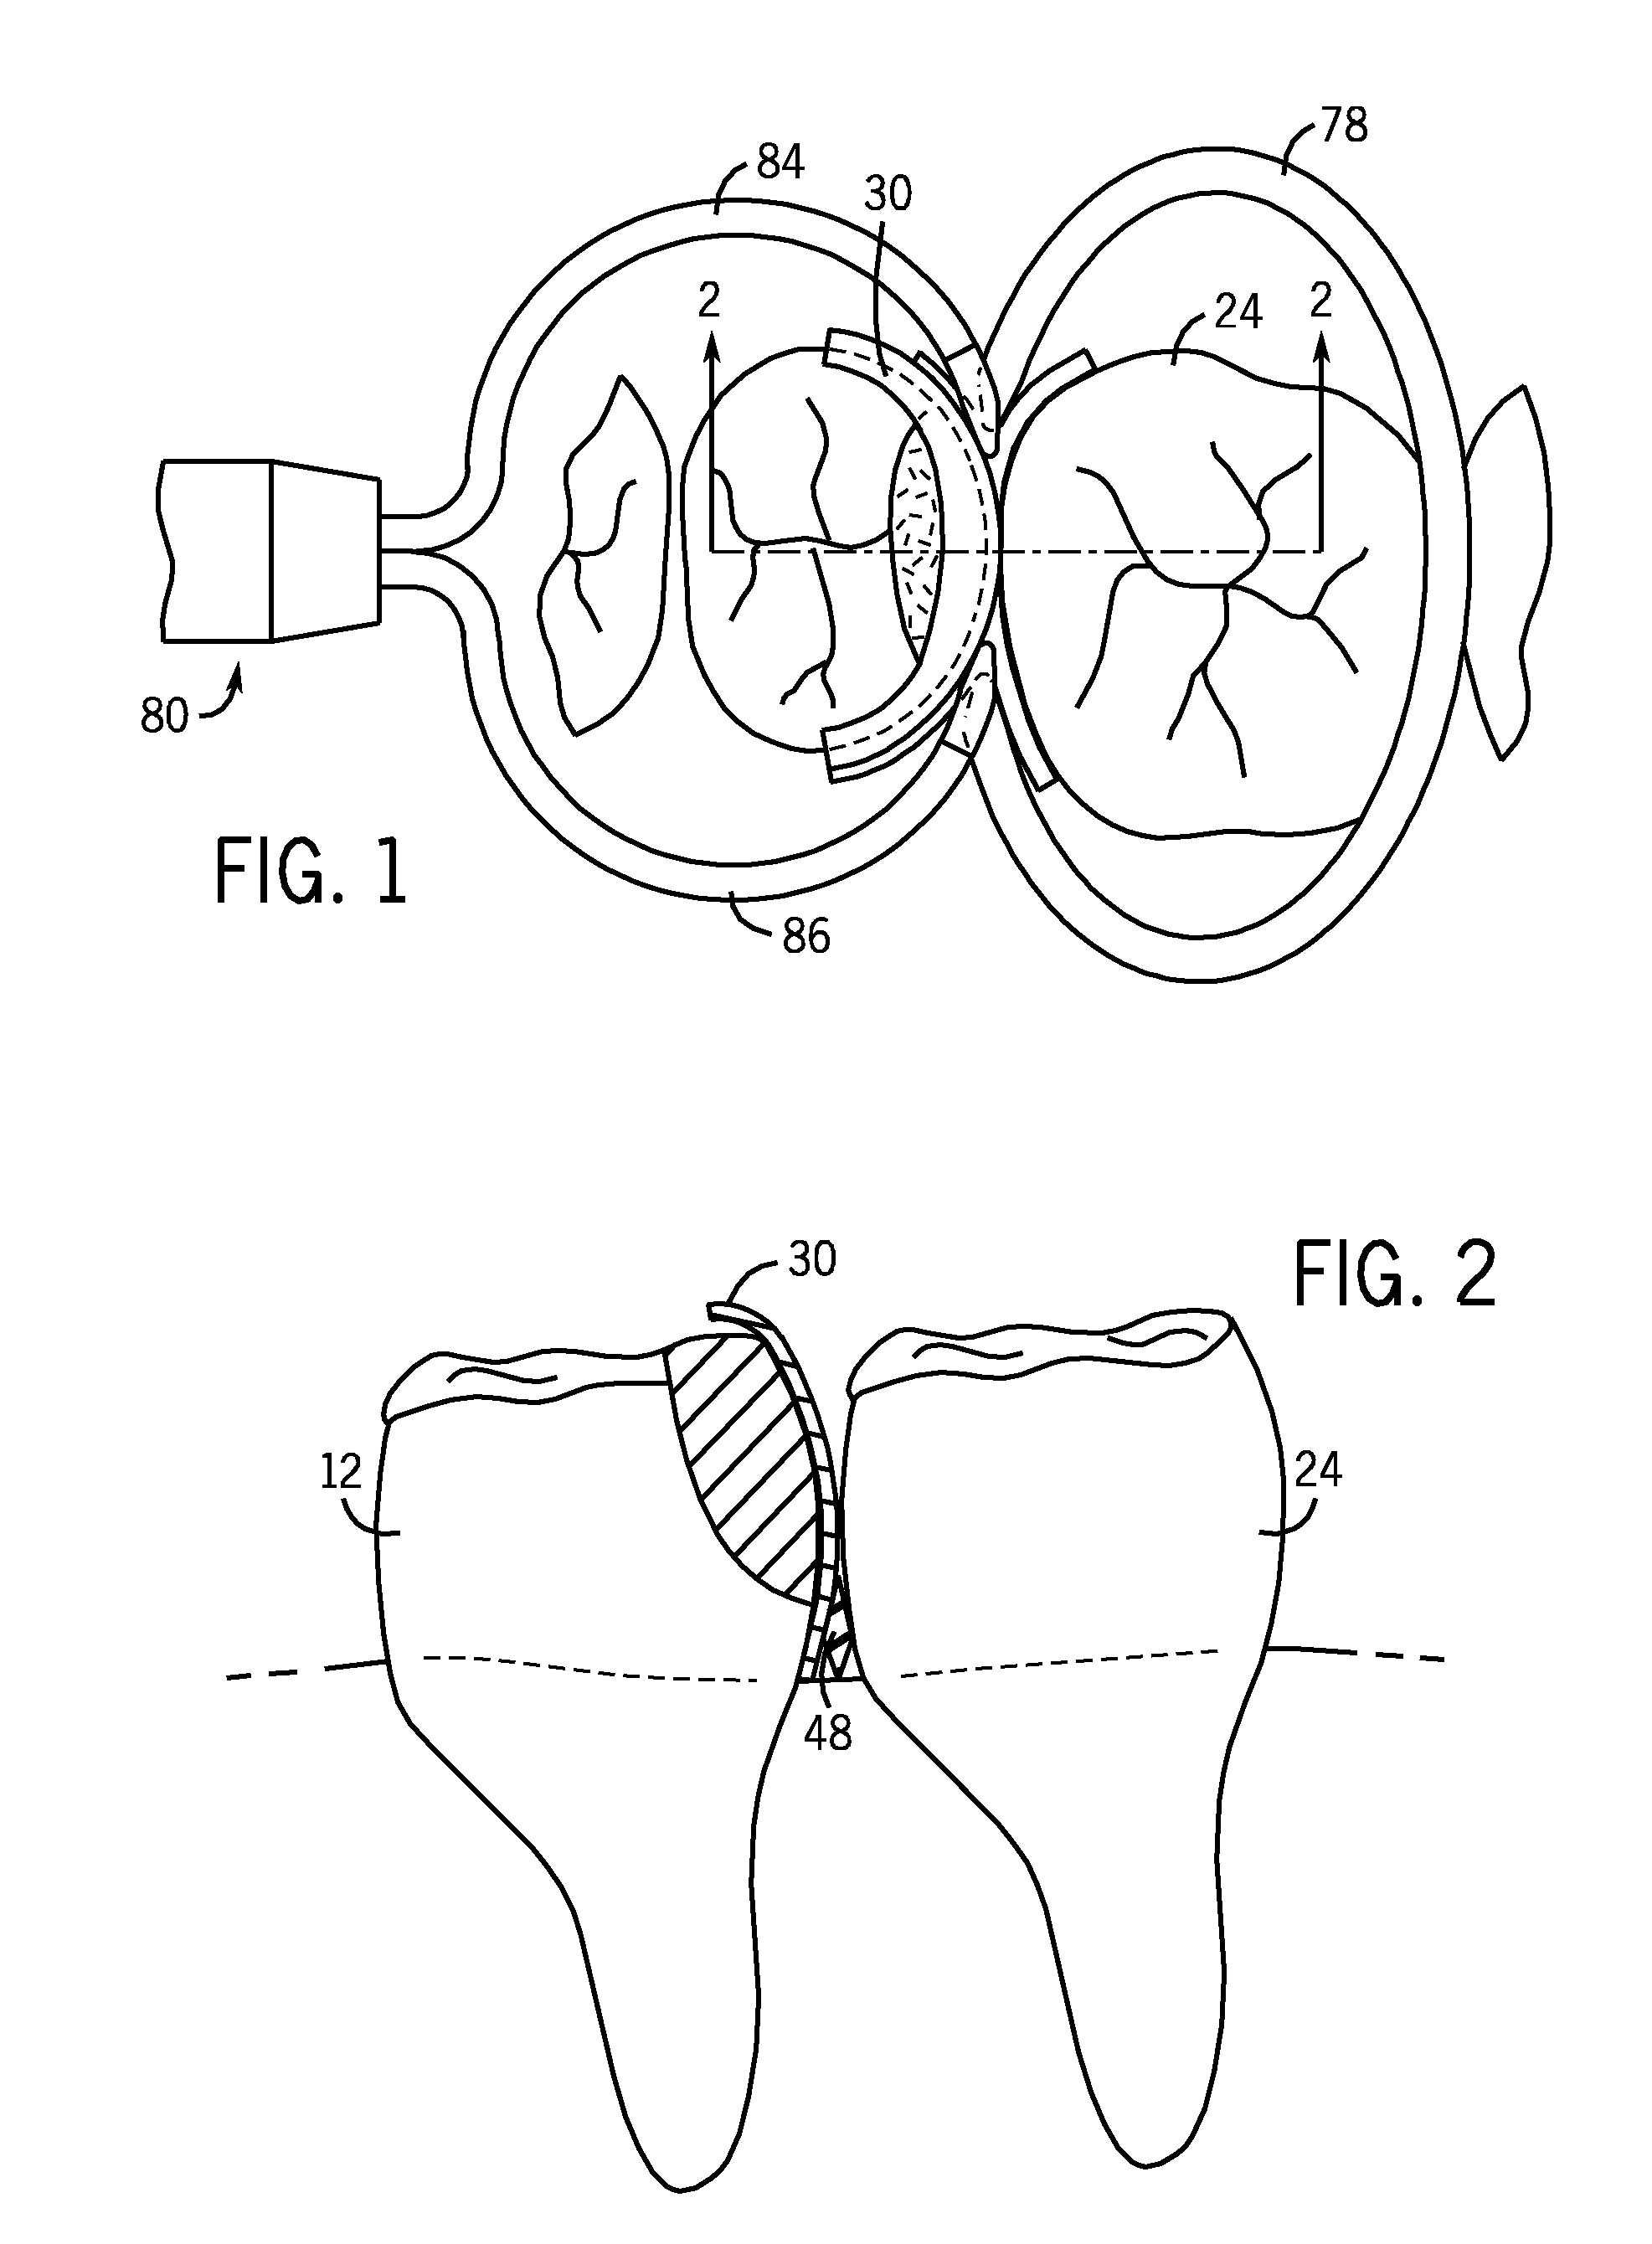 Dental Kits And A Seamless, Single Load Cavity Preparation And Filling Technique